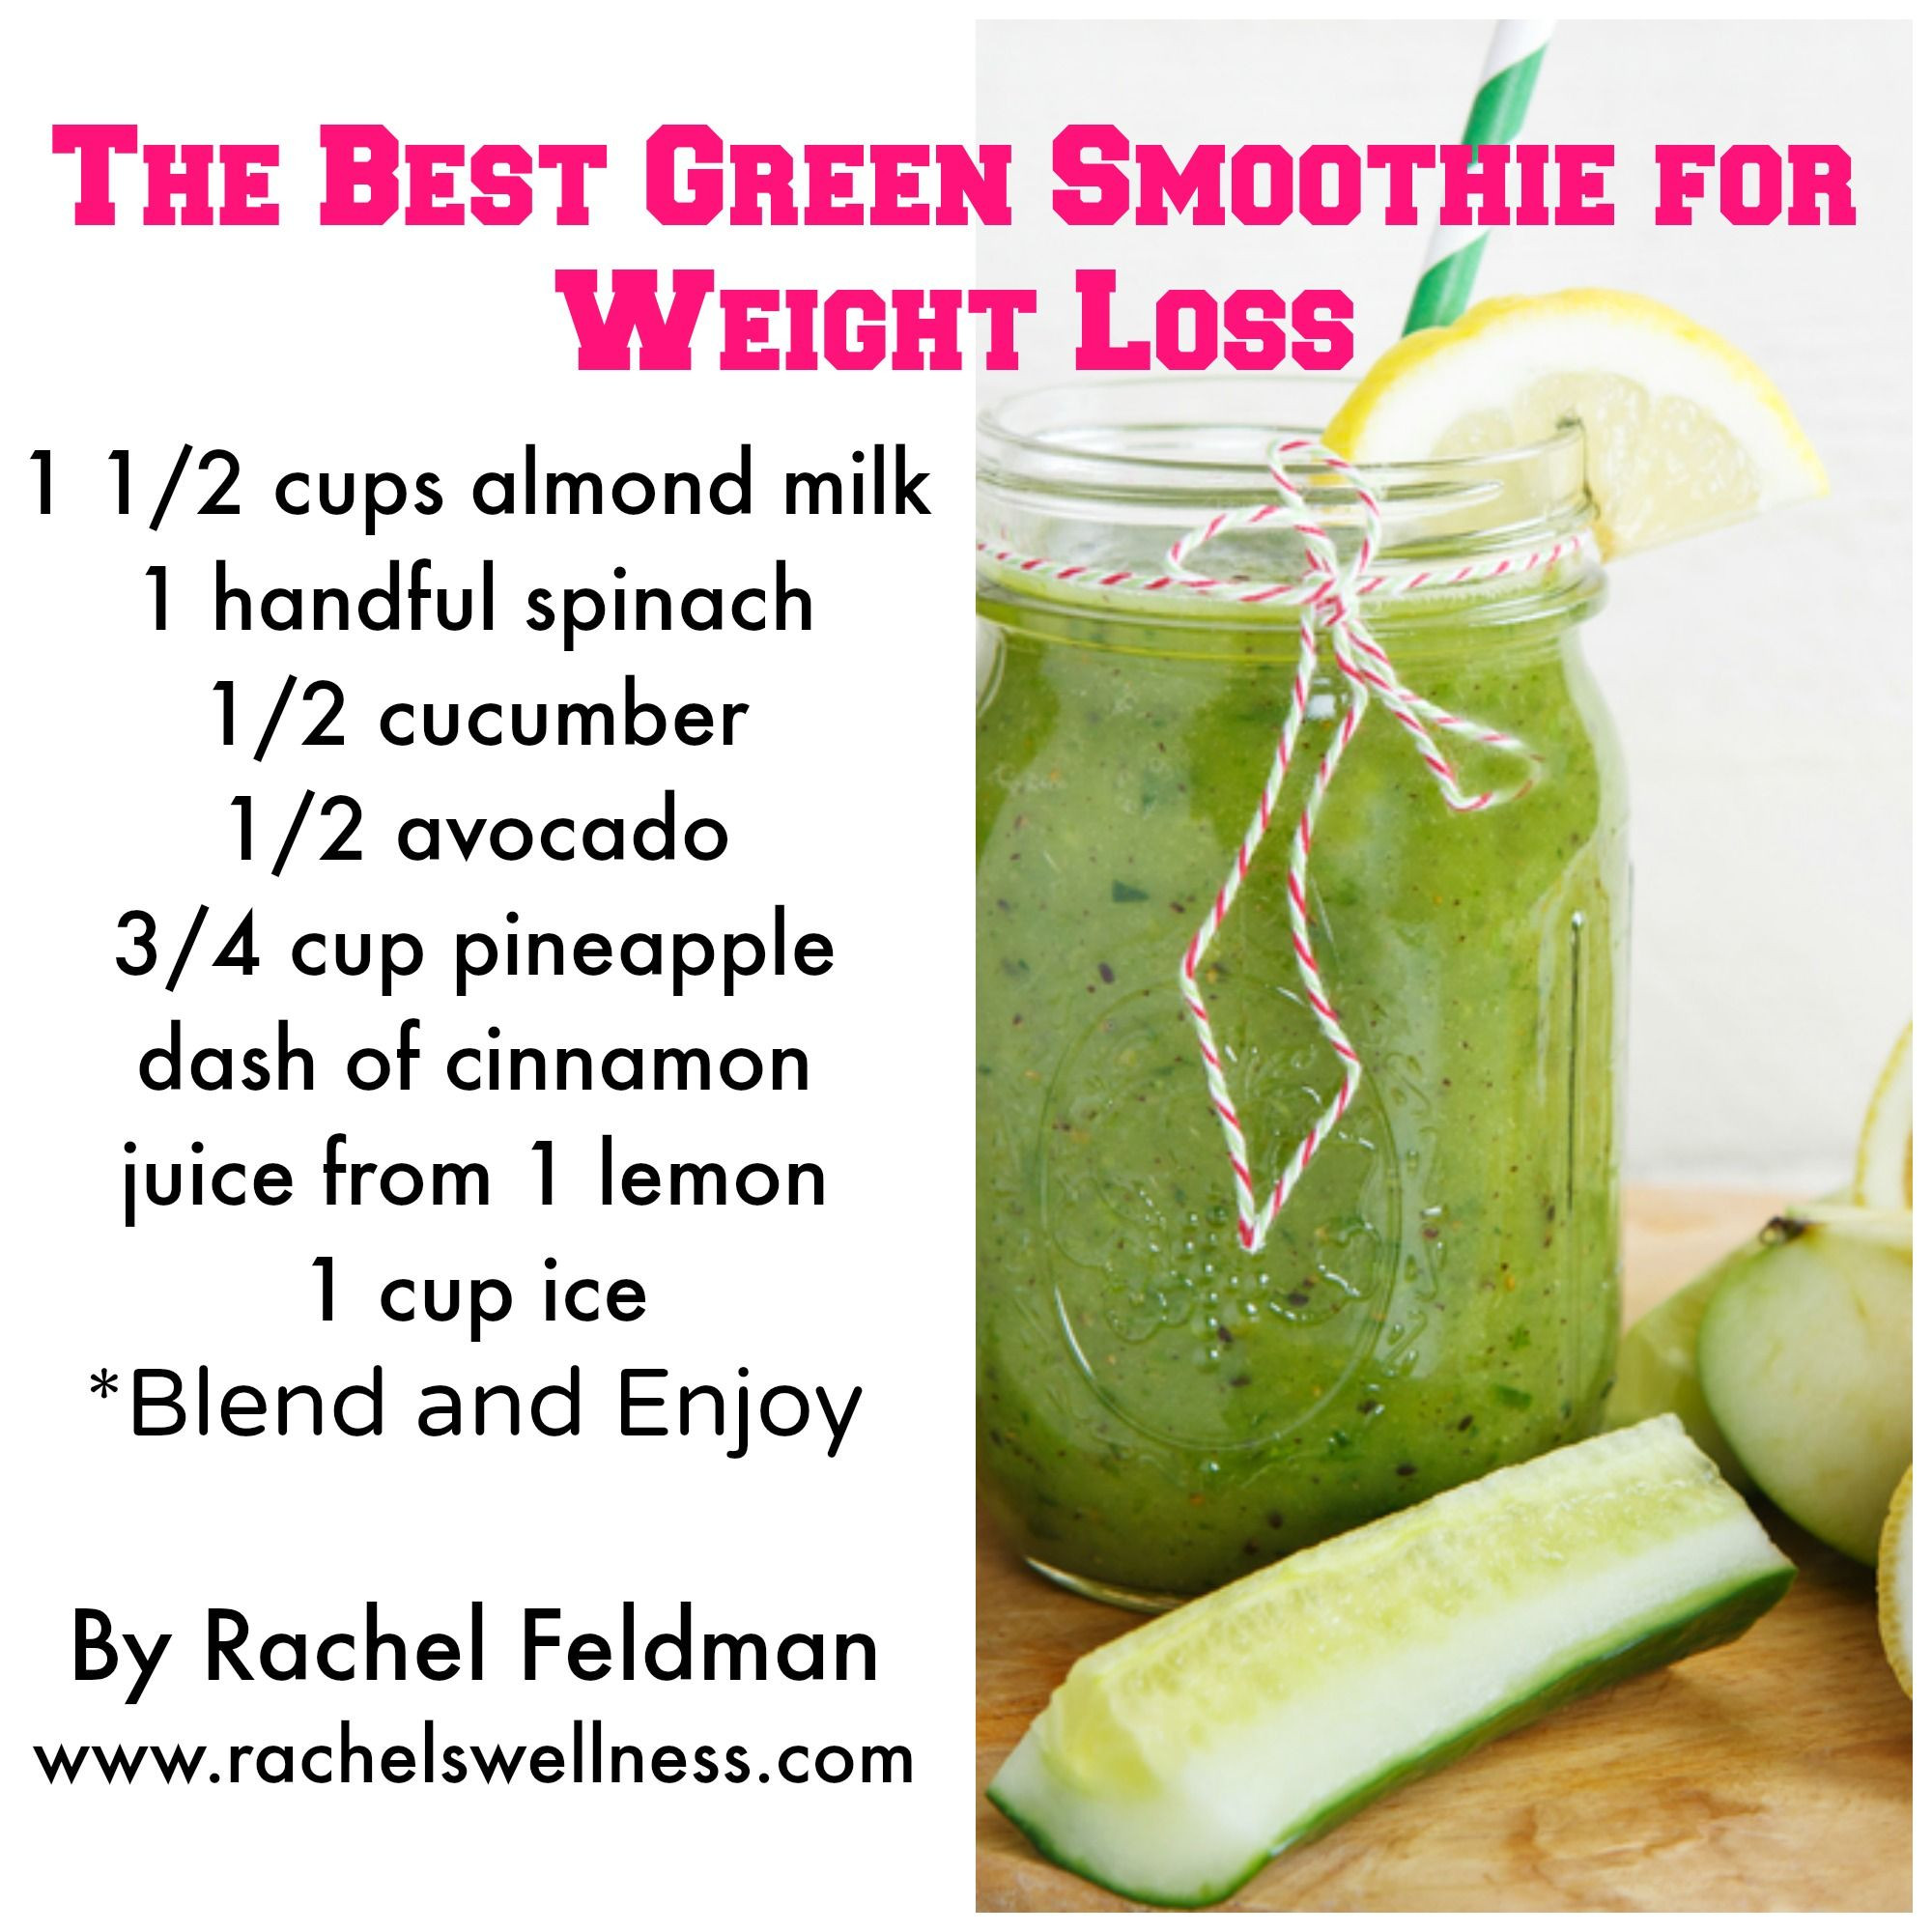 Weight Loss Morning Smoothies
 7 Healthy Green Smoothie Recipes For Weight Loss